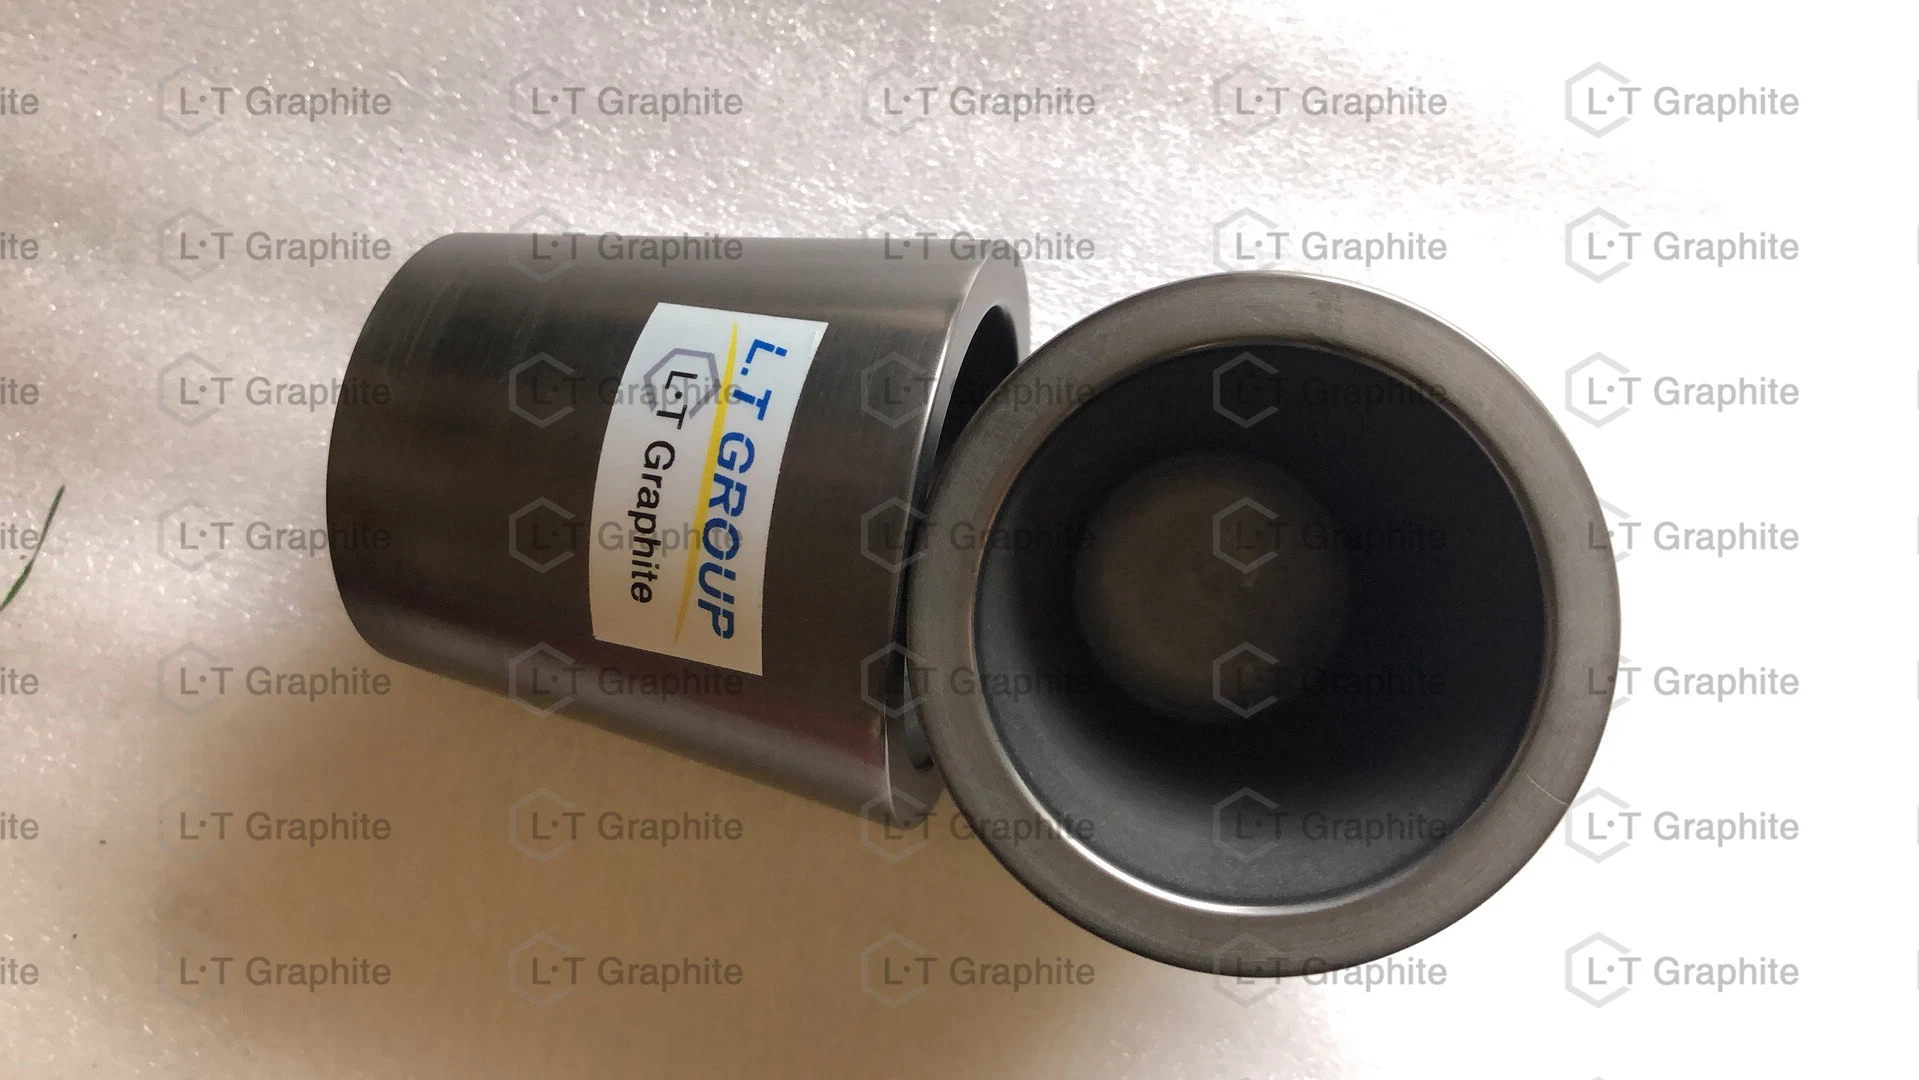 Chamotte Graphite Crucible Products for Melting Non-Ferrous Metals